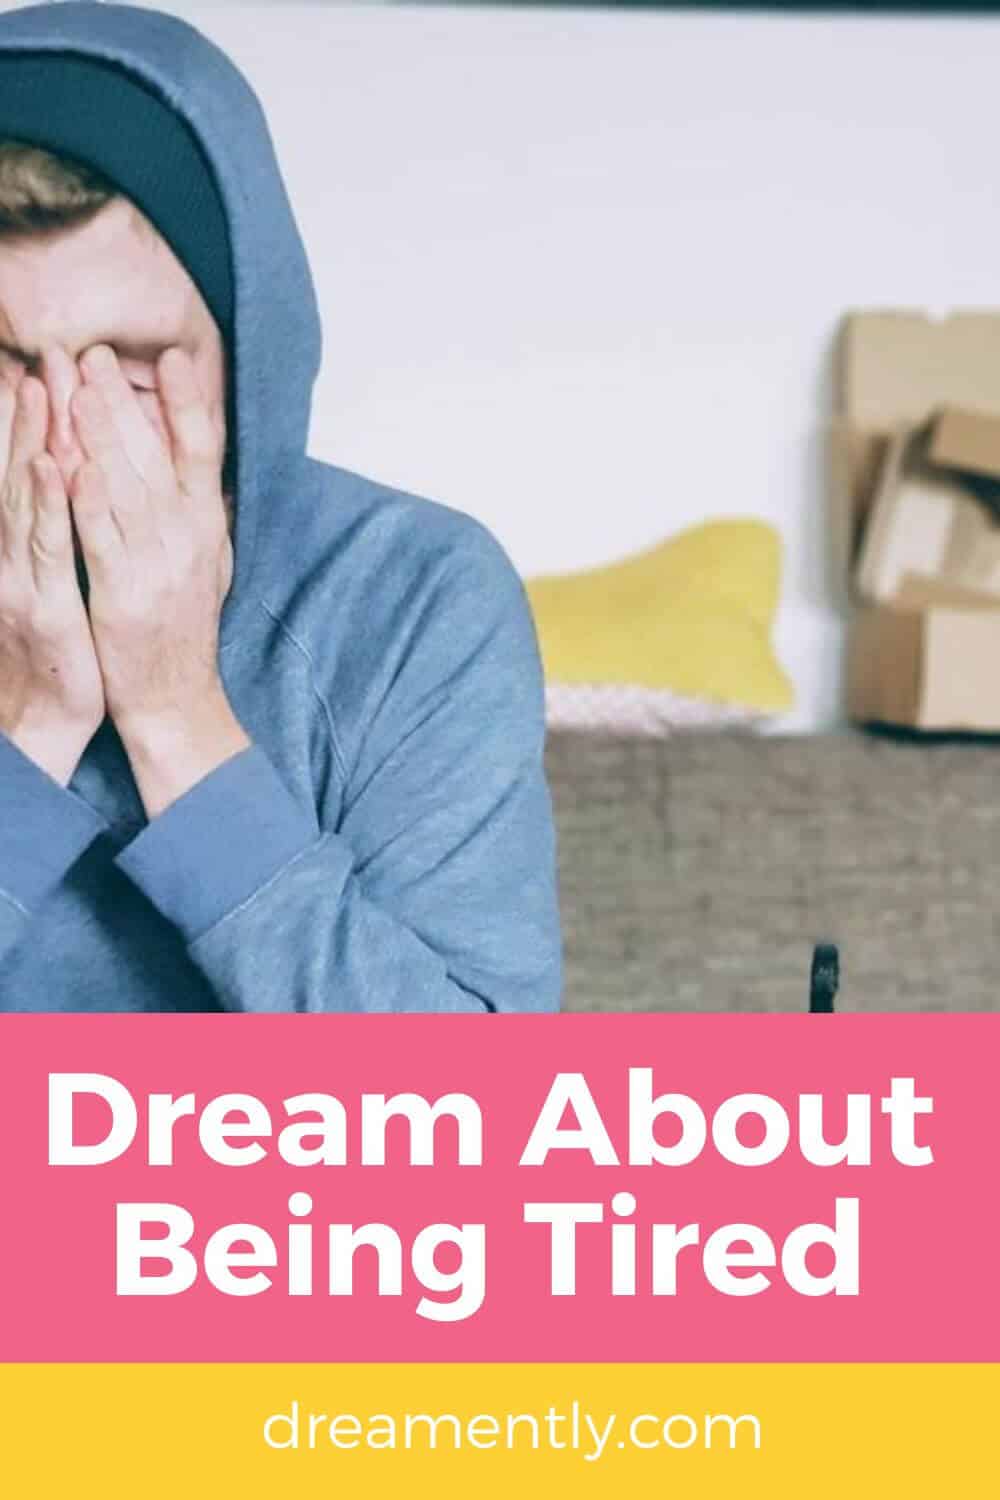 Dream About Being Tired